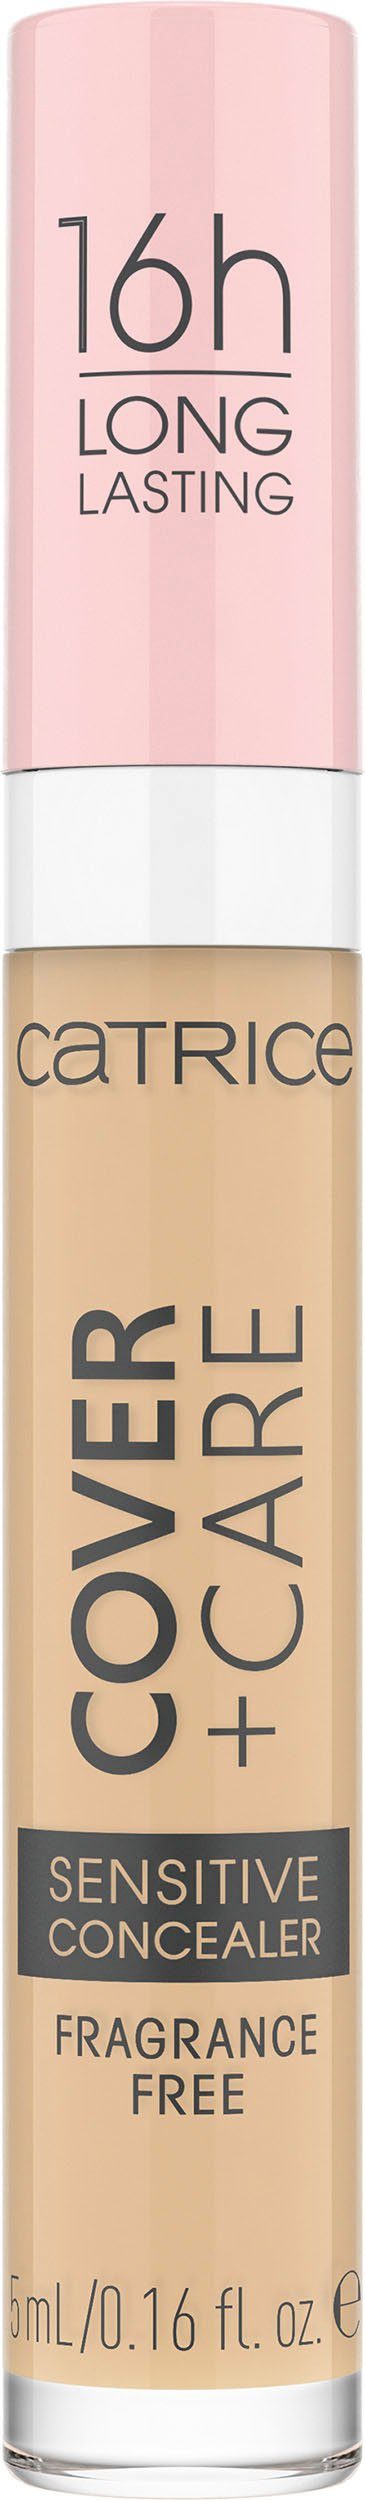 Catrice Sensitive 008W Care 3-tlg. Cover Catrice nude + Concealer, Concealer